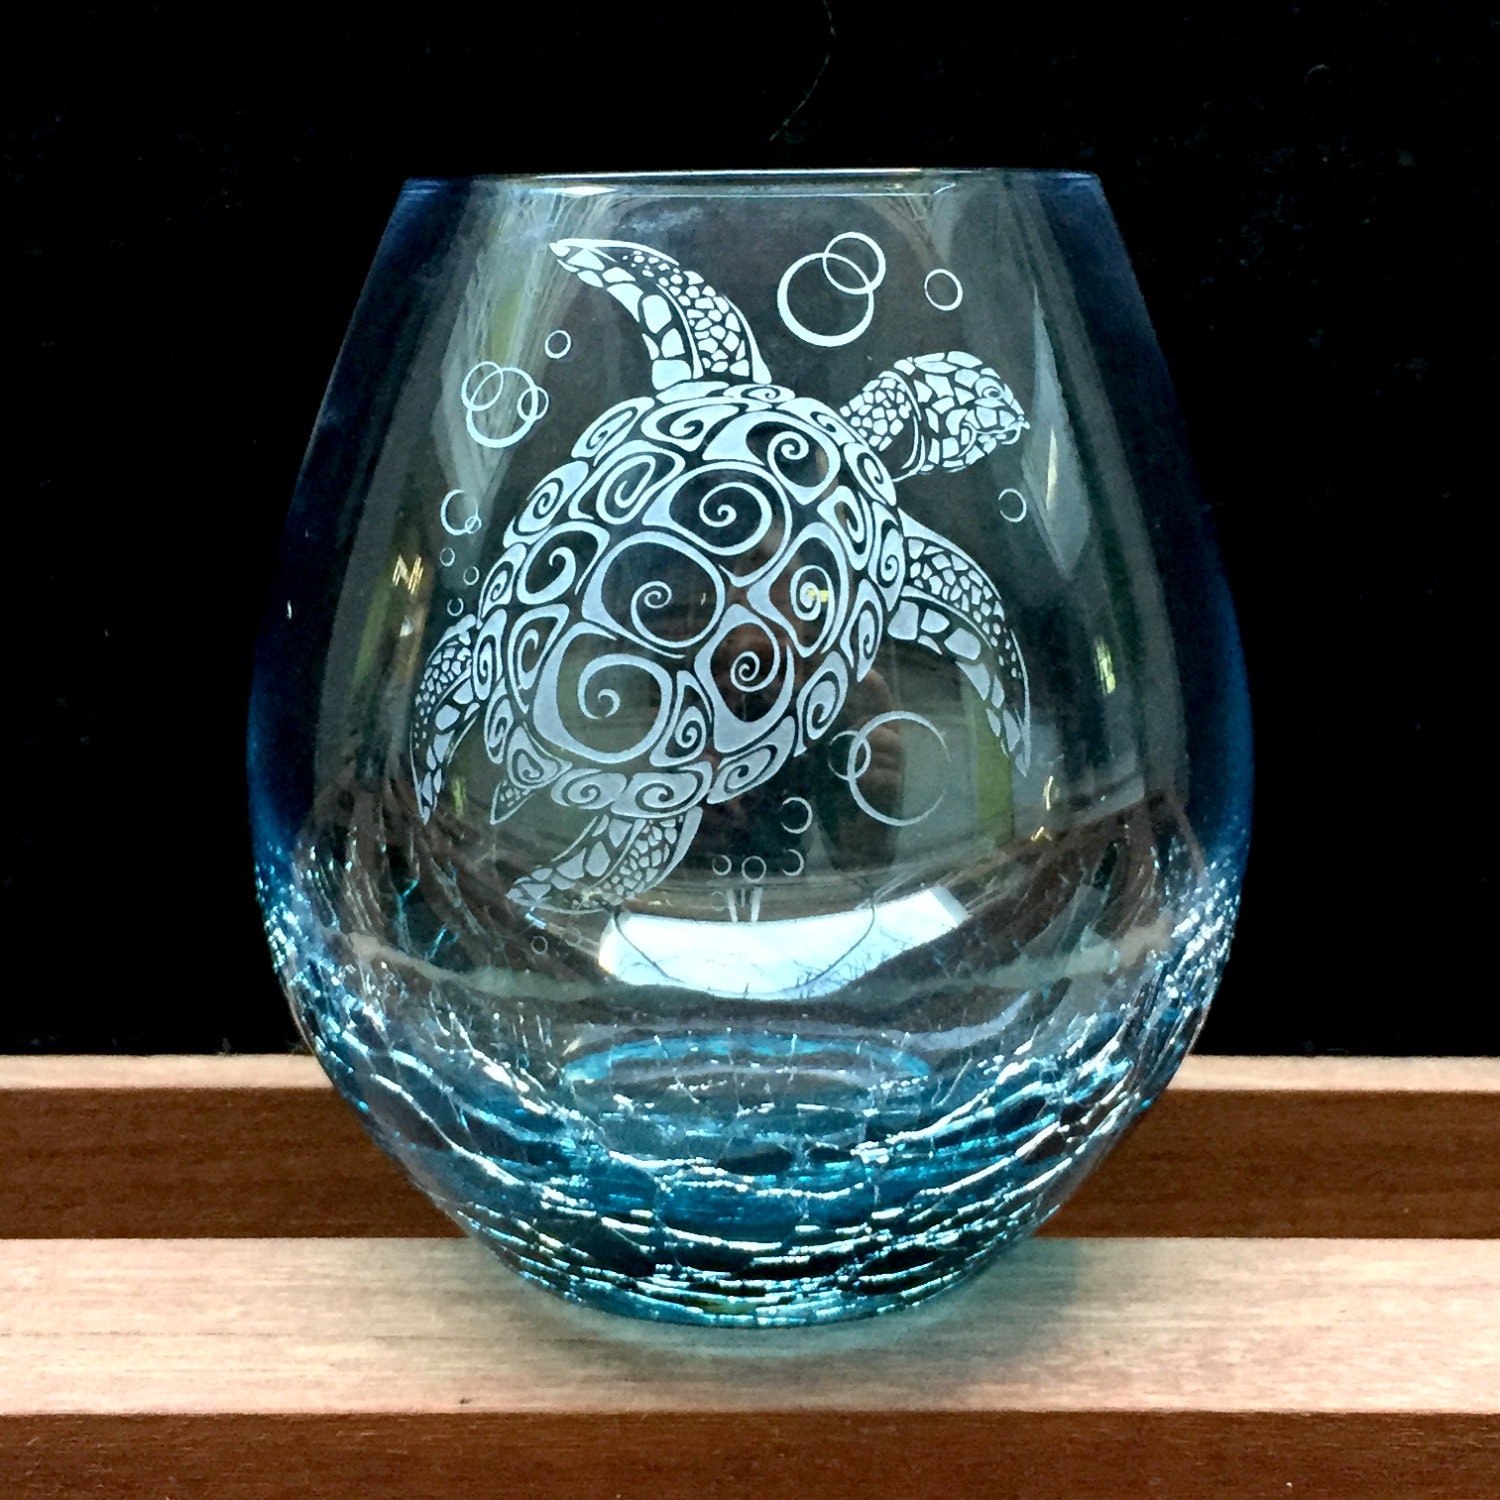 Etched sea turtle on teal crackle wine glass, wine glass decal, ocean wine glasses